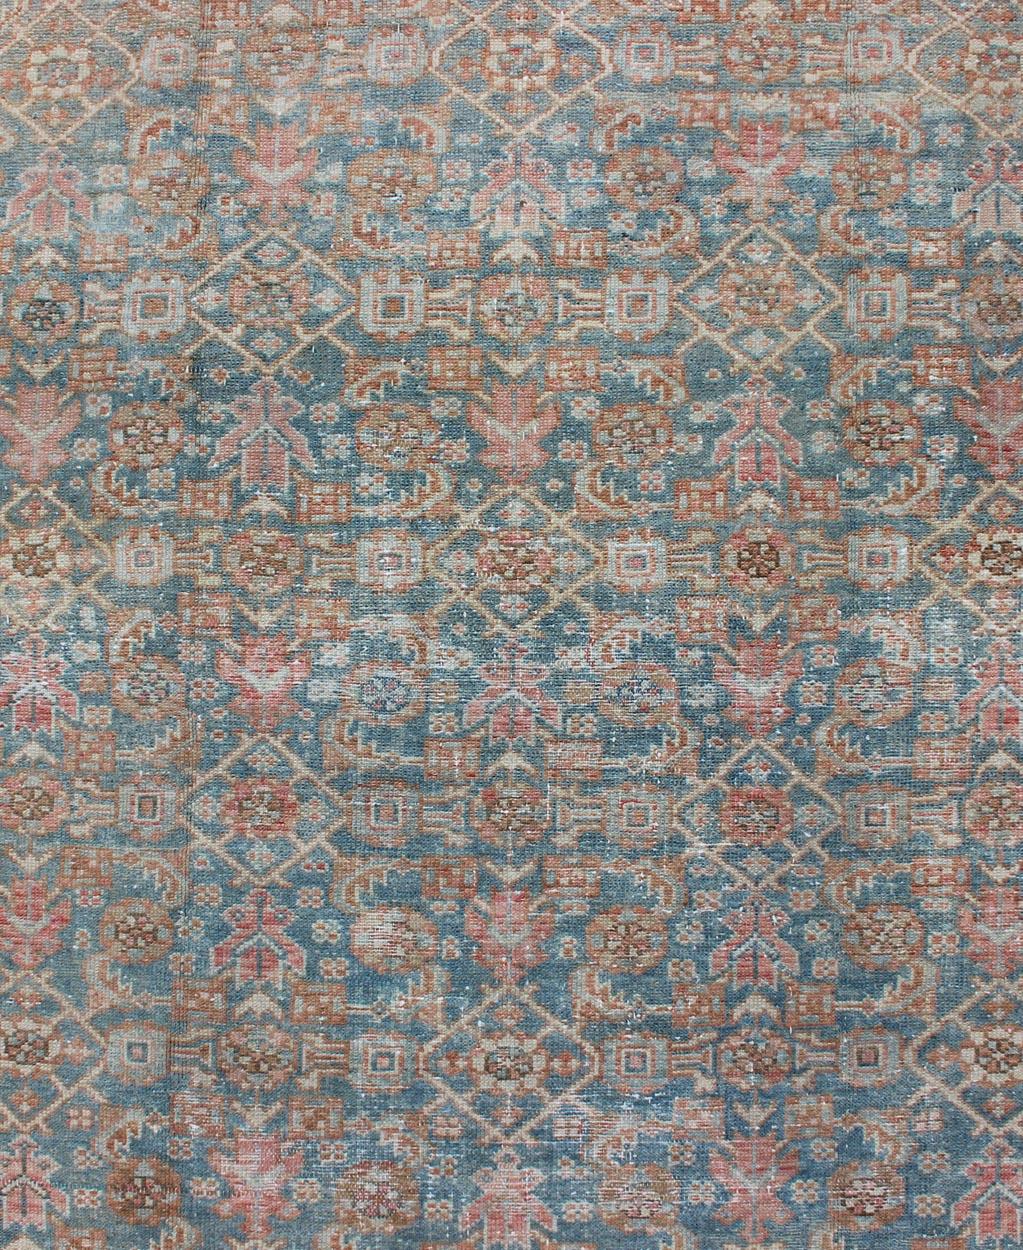 Antique Malayer Carpet with All-Over Design in Blue Gray Tones For Sale 1